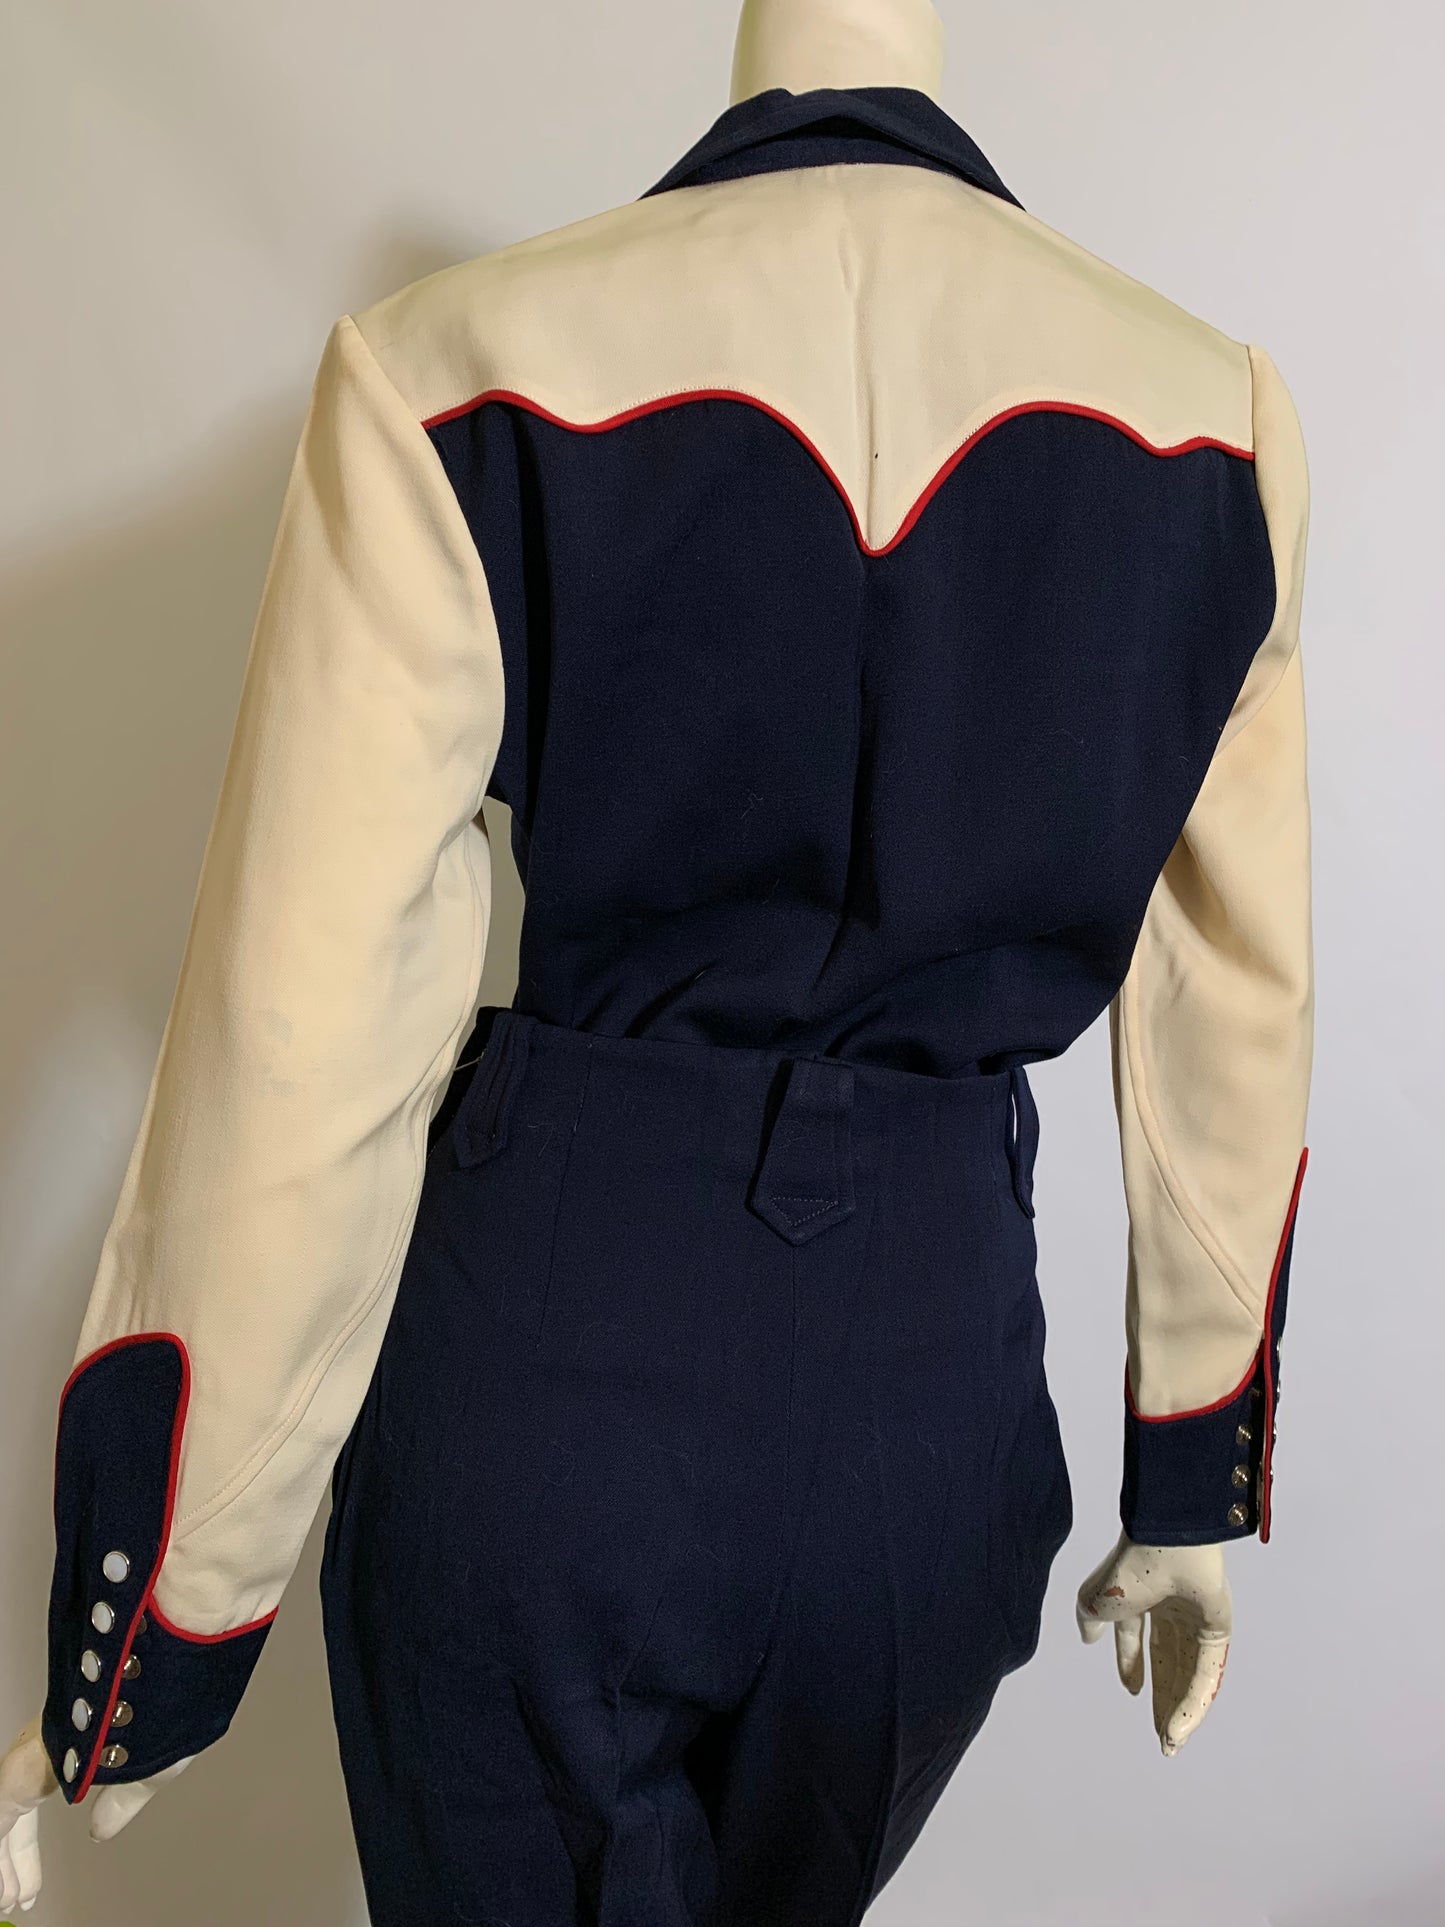 Iconic Deep Blue Gabardine Western 2 Pc Set with Red and Off White Accents circa 1940s